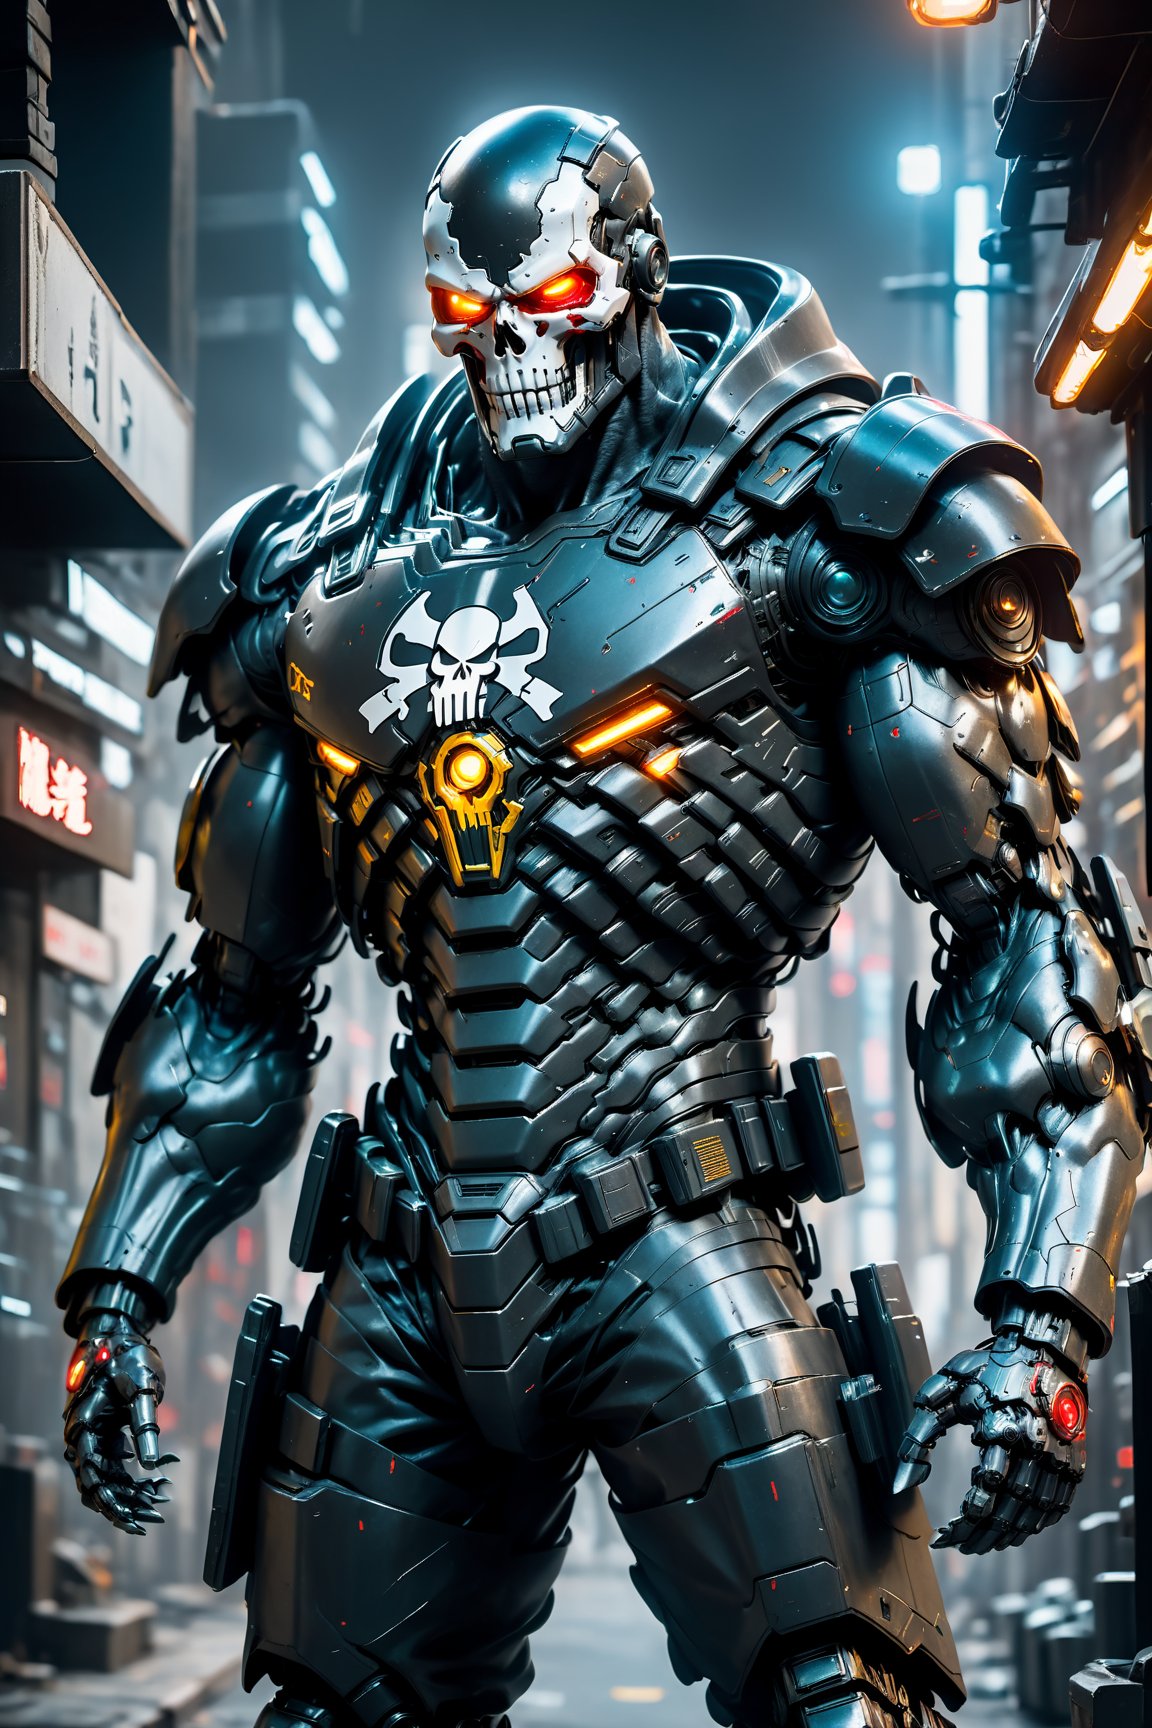 anti-hero Punisher mecha robo soldier character, anthropomorphic figure, wearing black futuristic soldier bloody armor and weapons, metal armor, full-face helmet, muscular and veins body, realistic figure, hyperdetailed, cinematic lighting photography, 32k uhd, rgb lighting on suit, (hyperrealistic:1.2), full_body, walking on dark alley, cyberpunk city, cyberpunk style